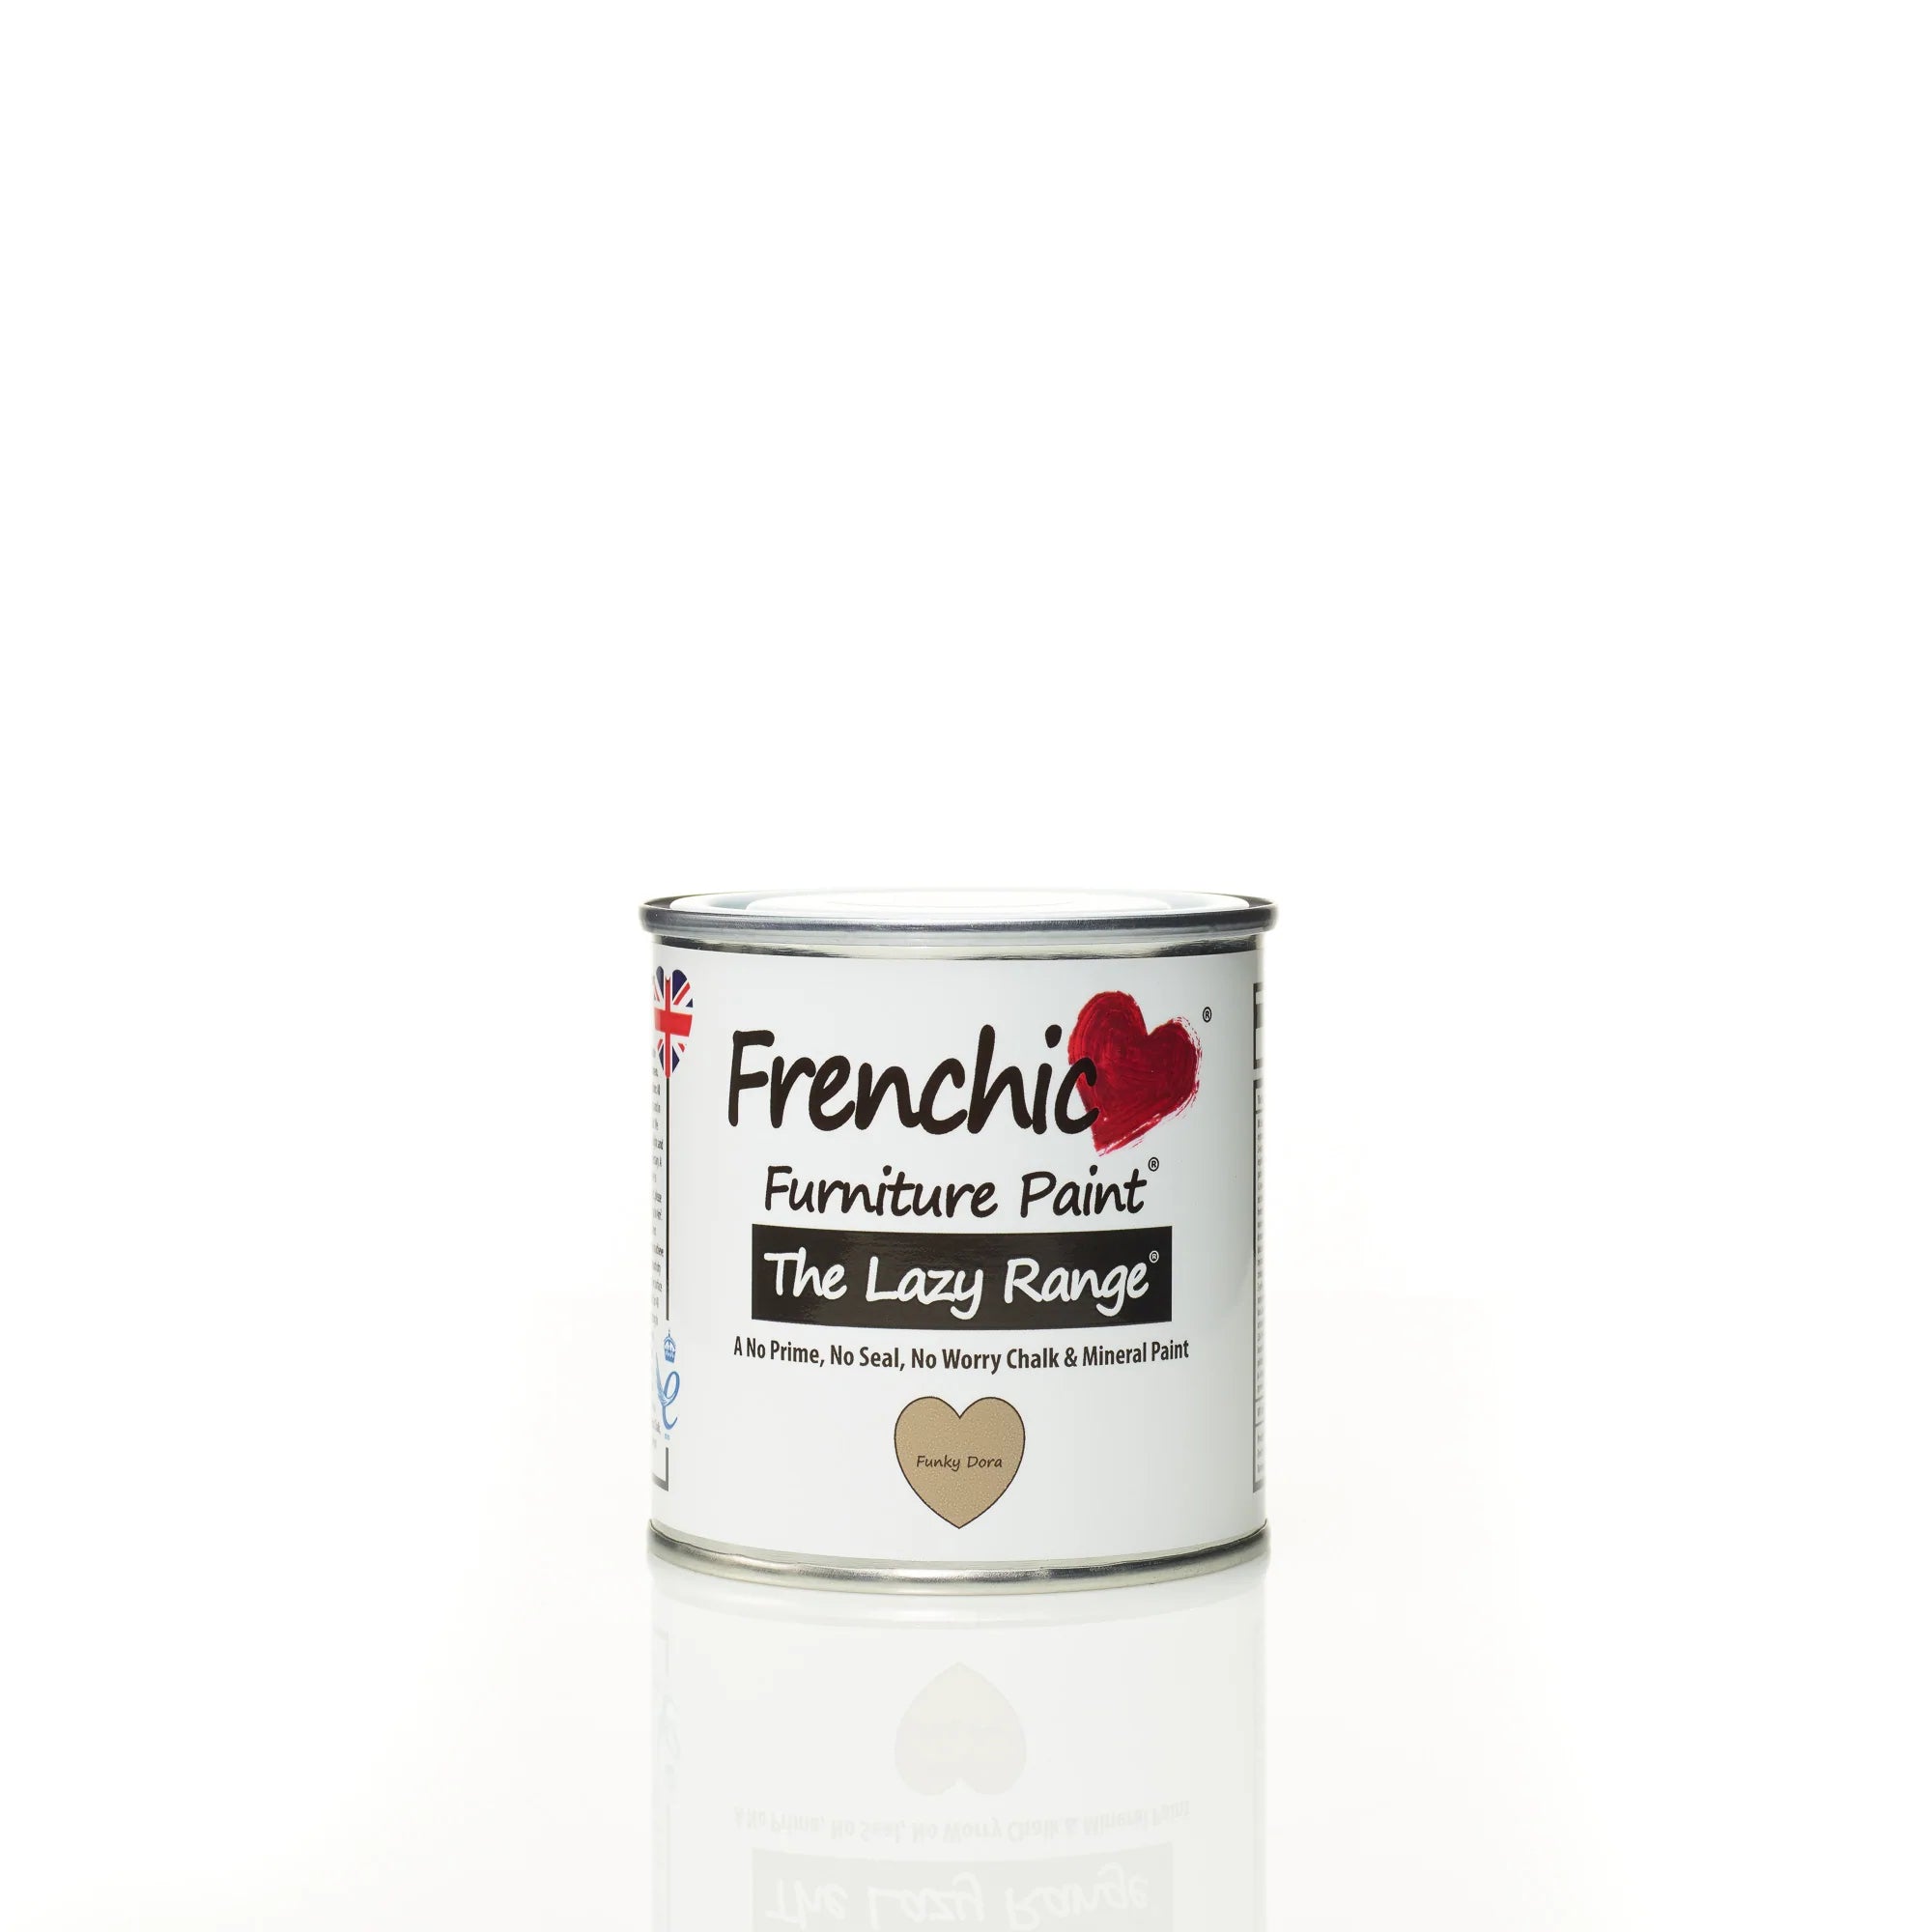 Frenchic Paint | Lazy Range - Funky Dora by Weirs of Baggot St